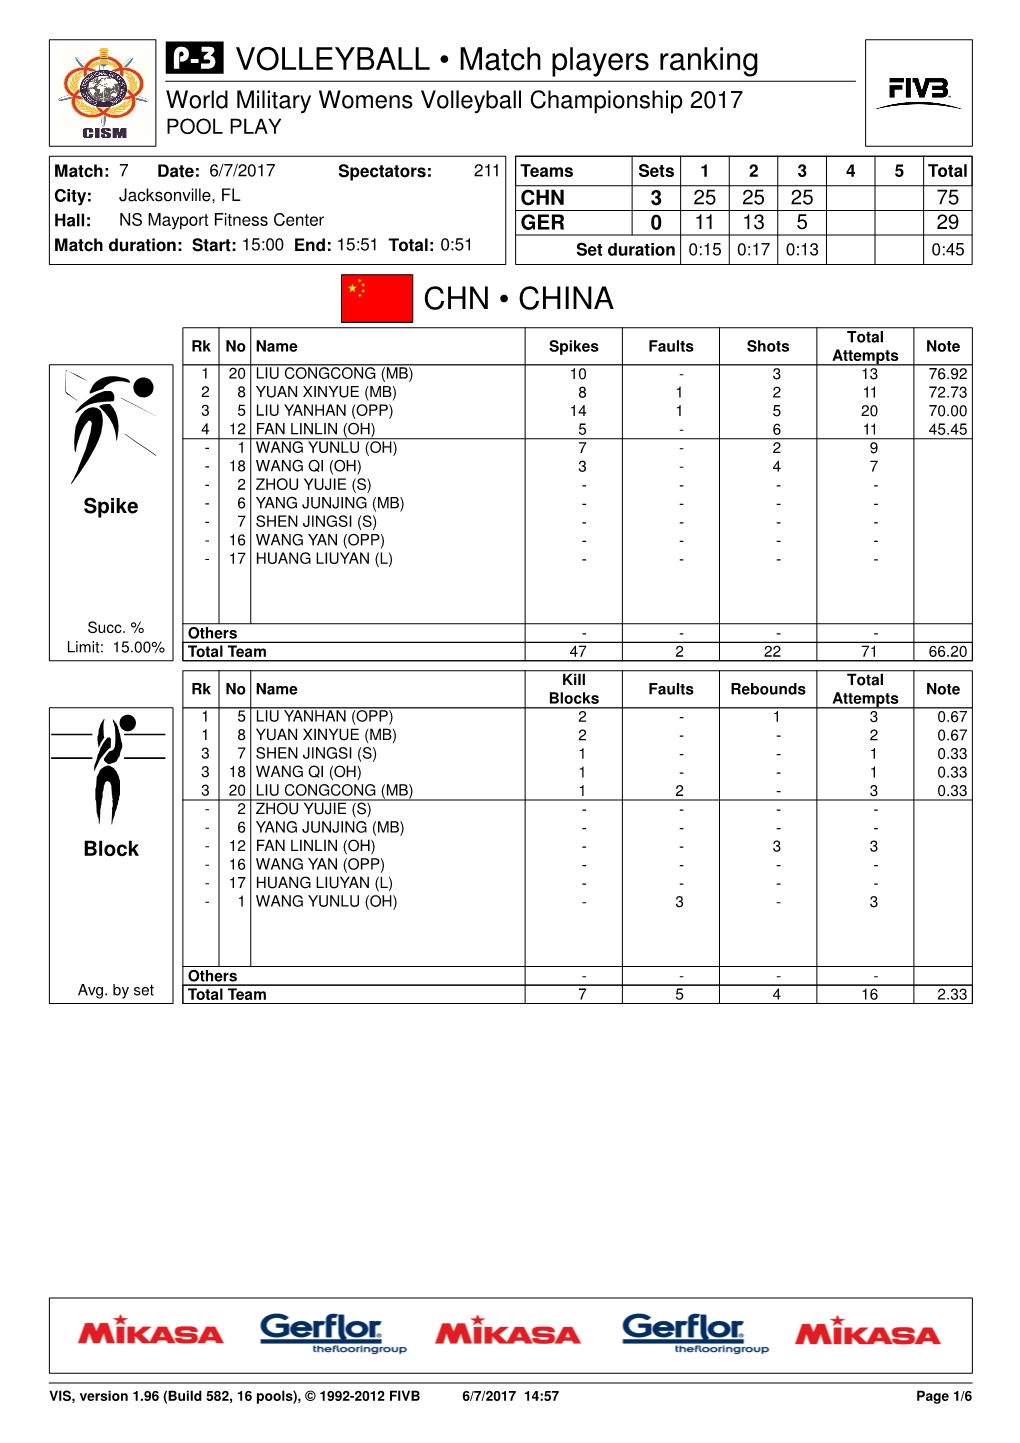 P-1 for Match 7: CHN-GER